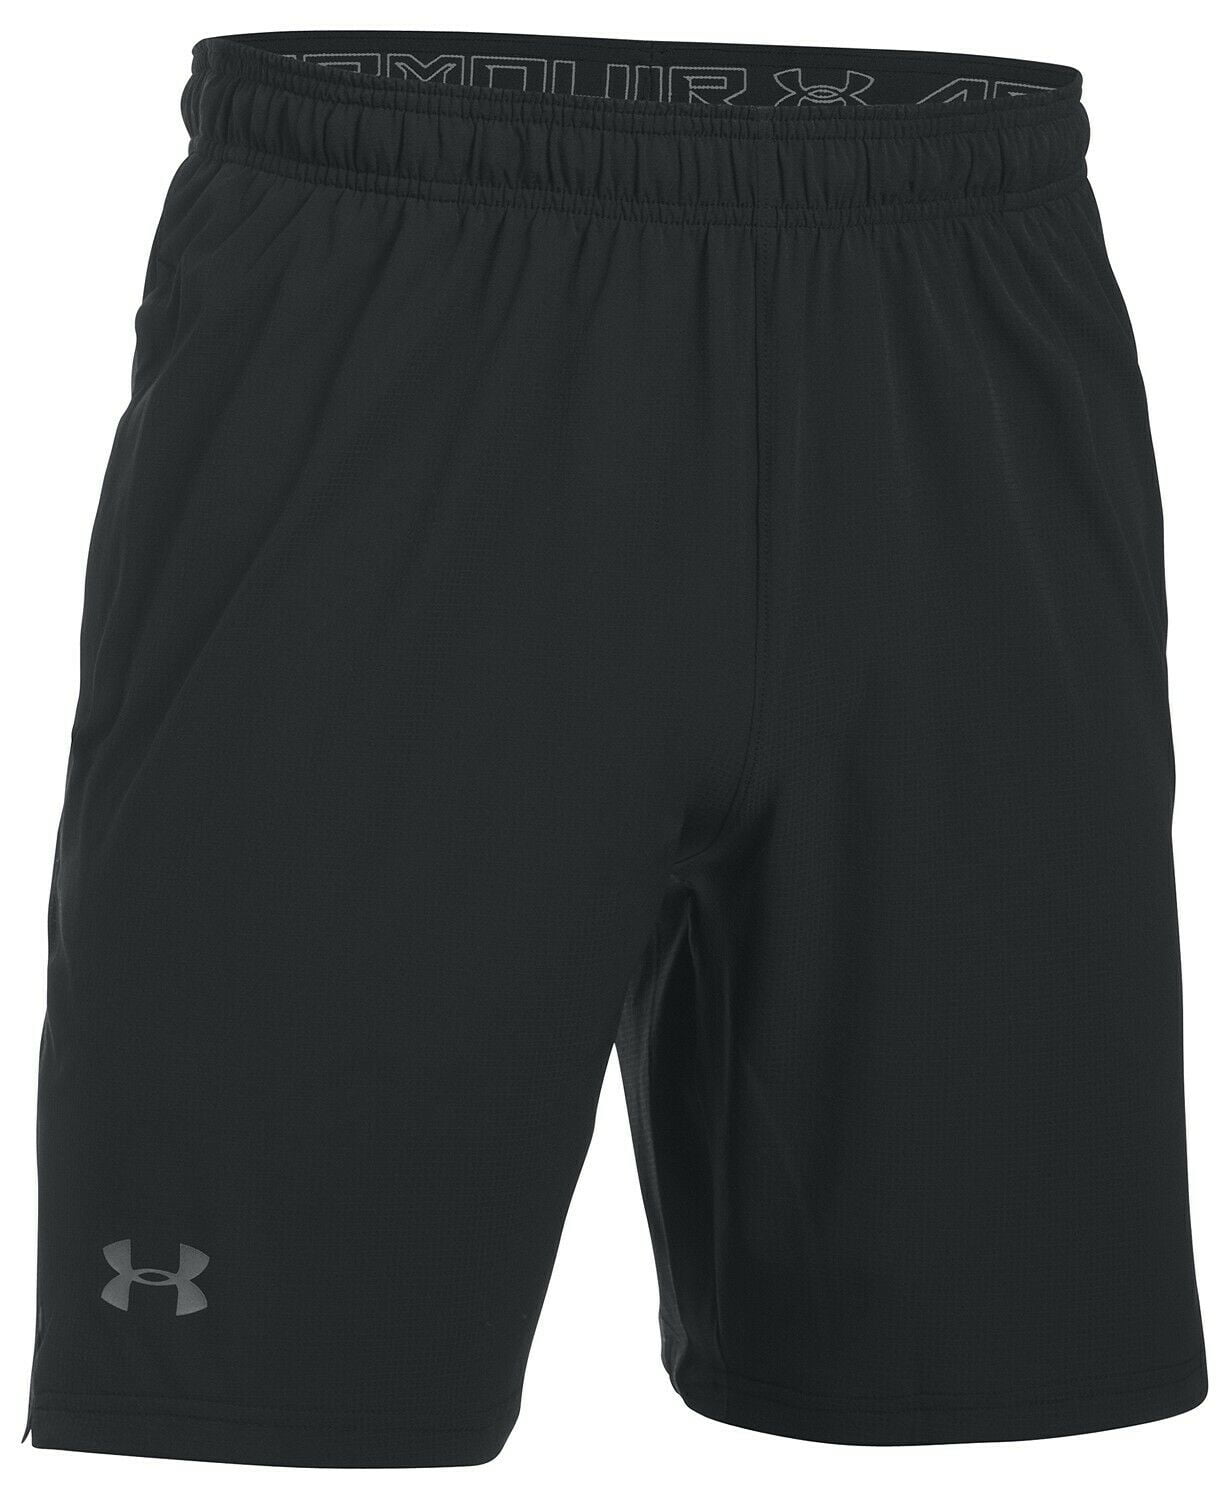 Under Armour Cage Mens Training Shorts Black 